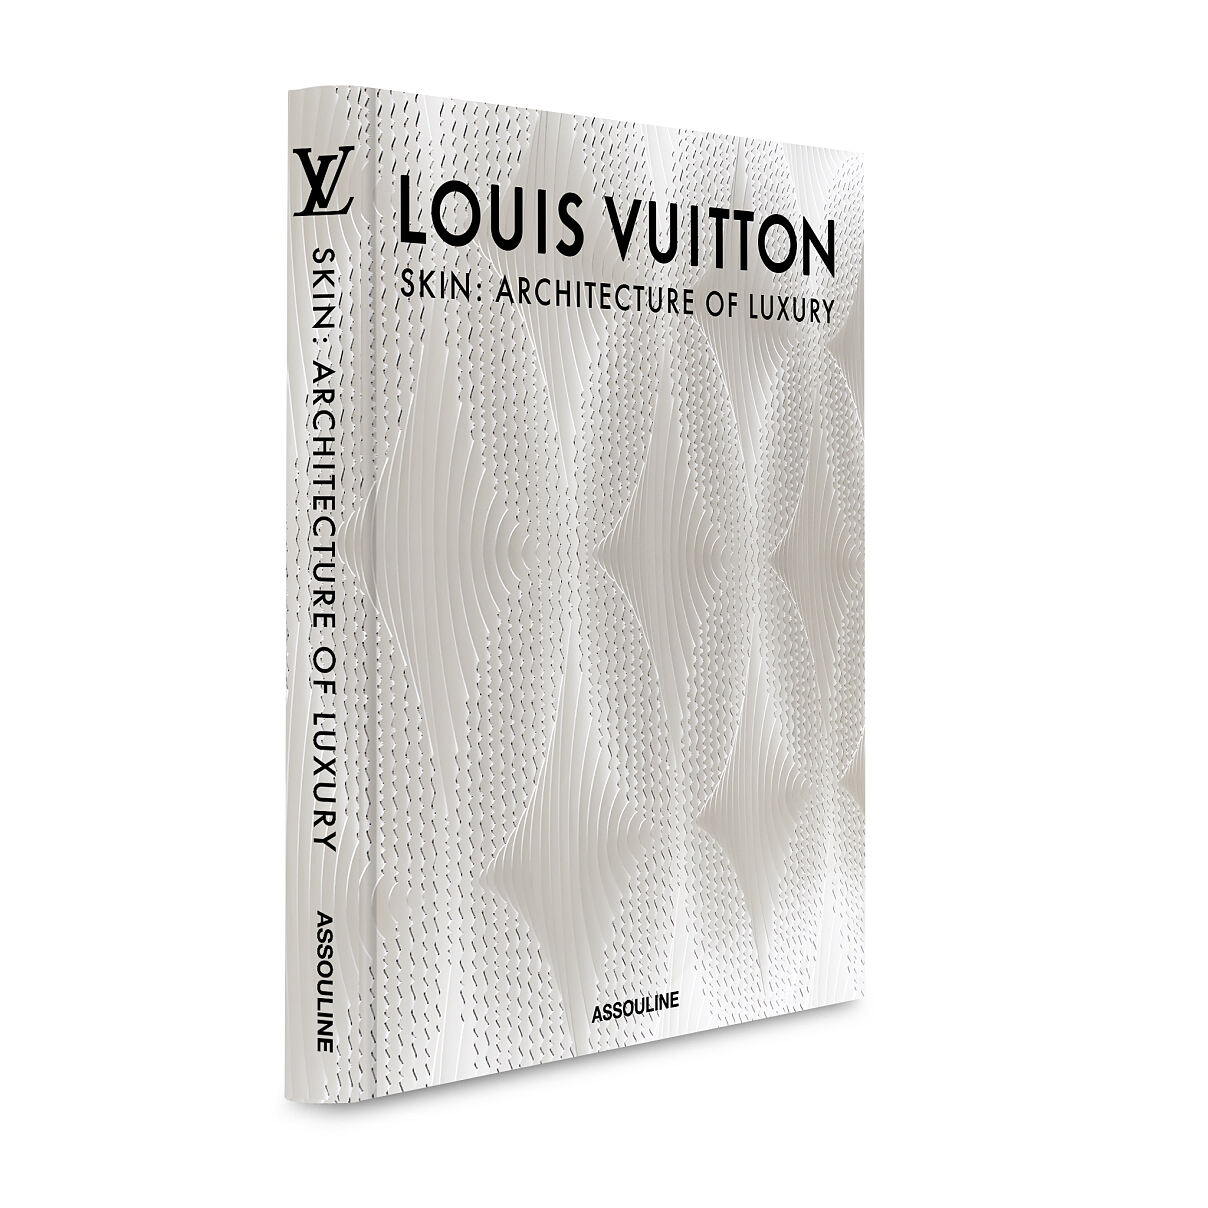 LV_Louis Vuitton Skin - The Architecture of Luxury_Cover (2)